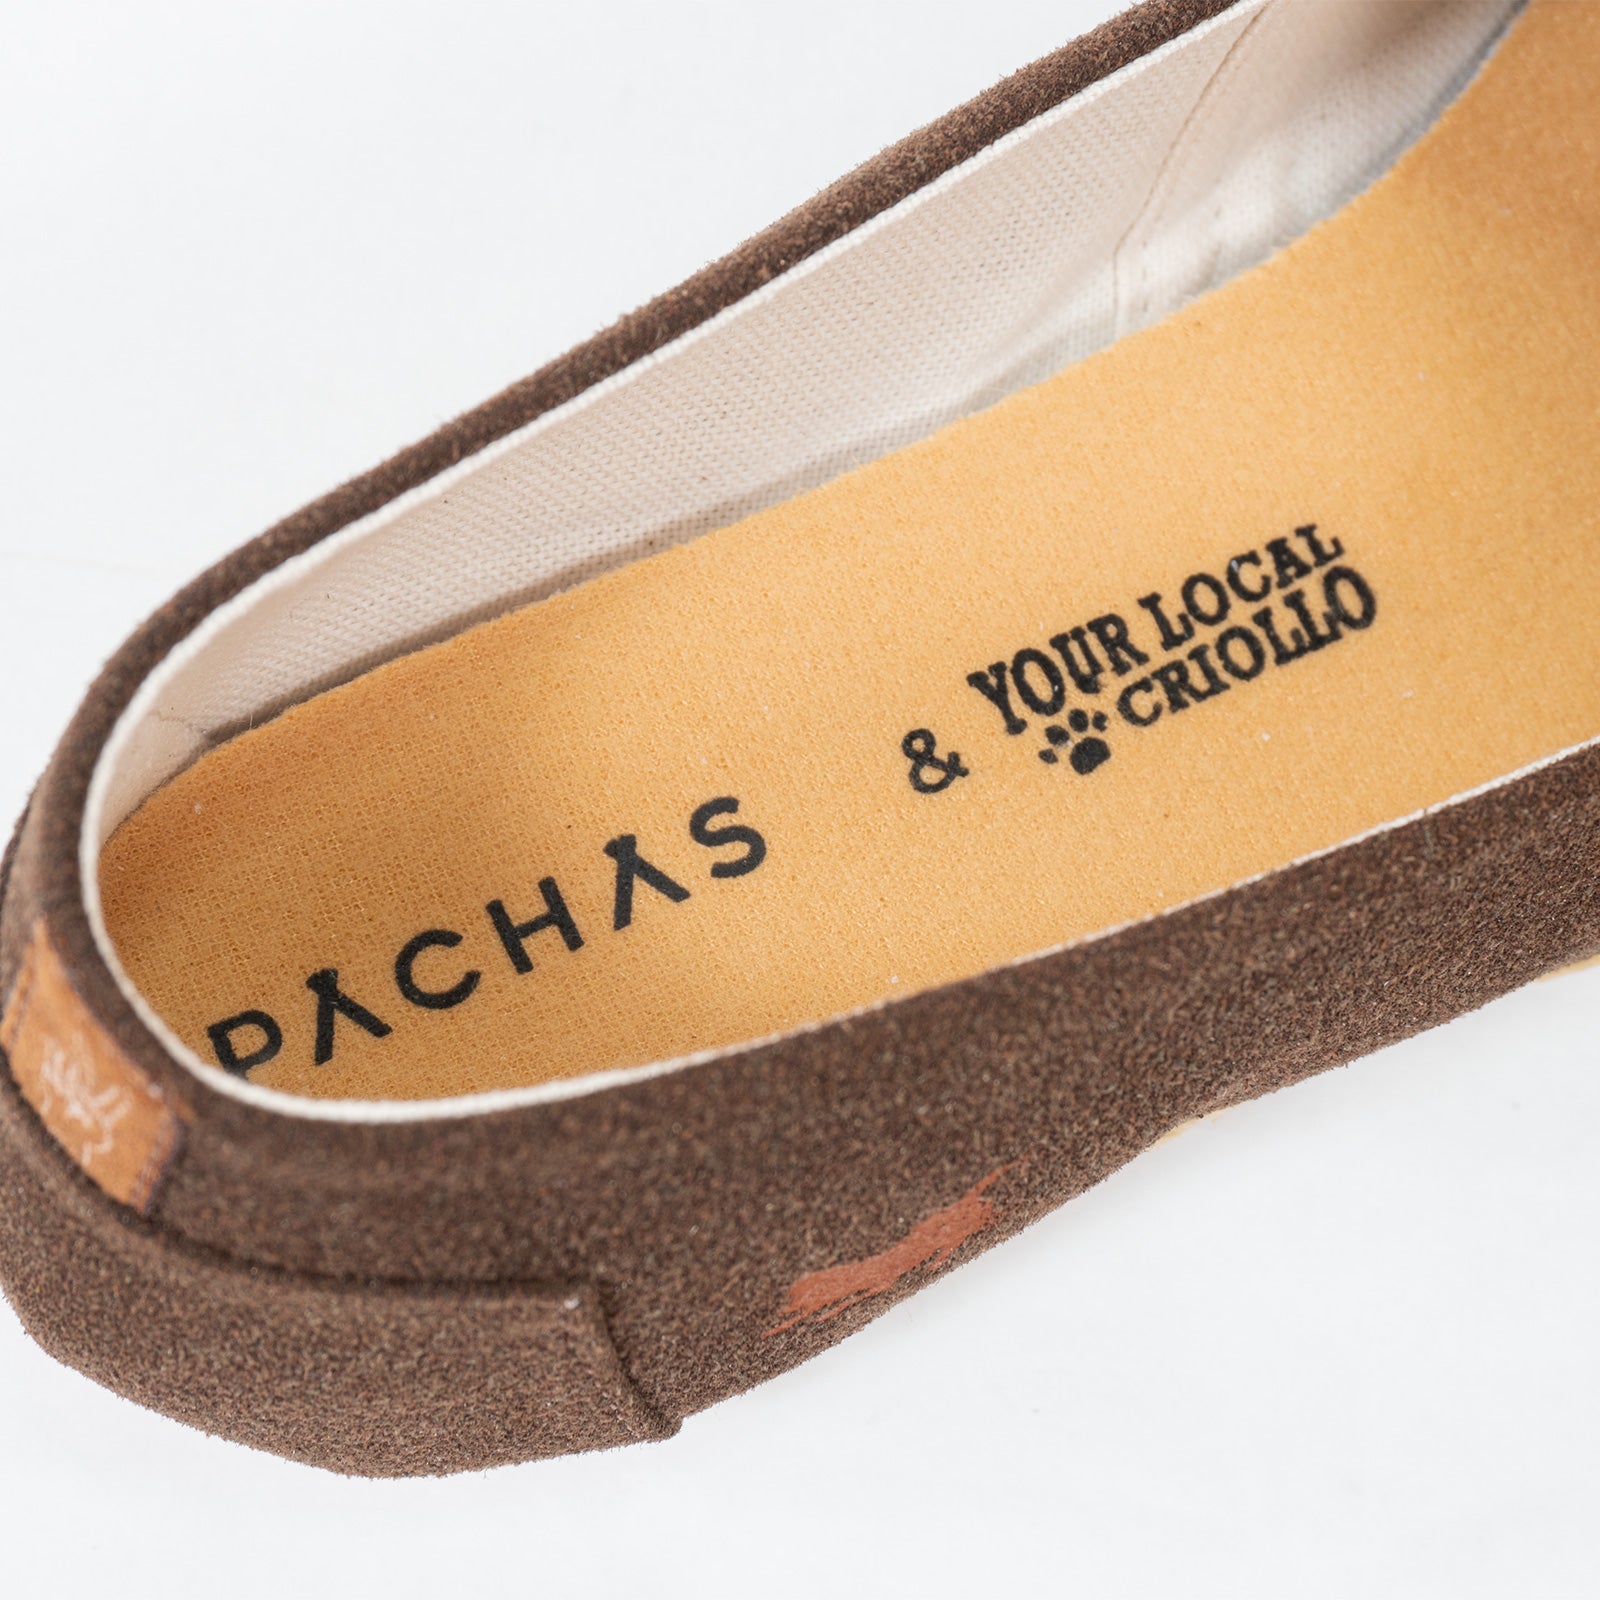 Pachas "Support your local criollo"